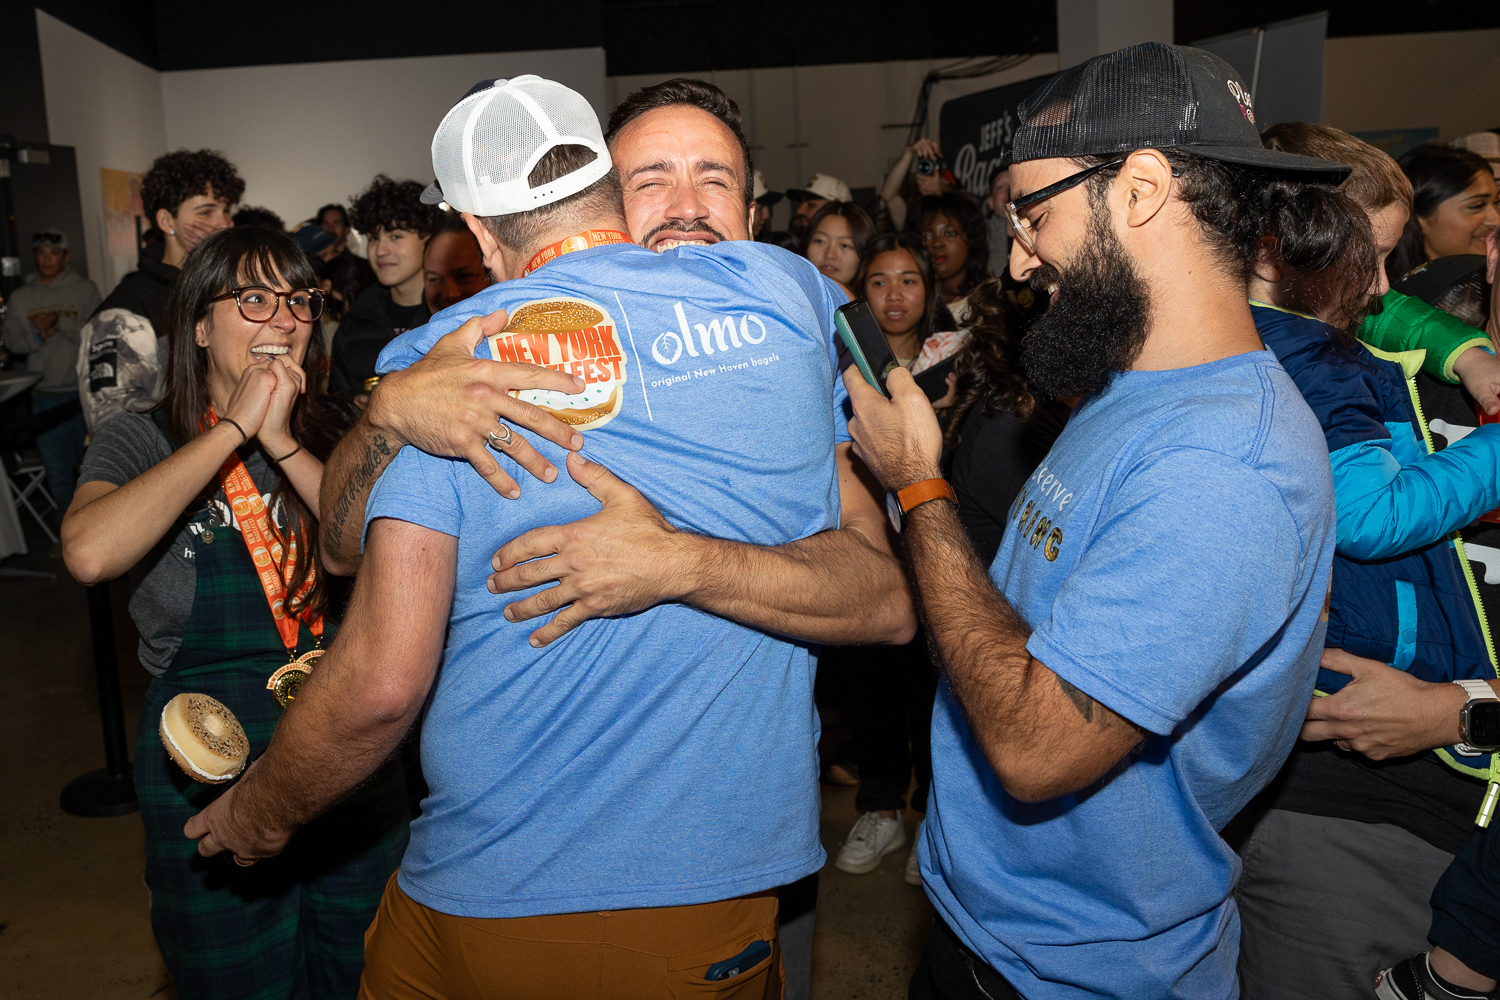 A man in a blue shirt and white hat from Olmo holding a bagel award for “Best of the Fest” and is hugging another man.